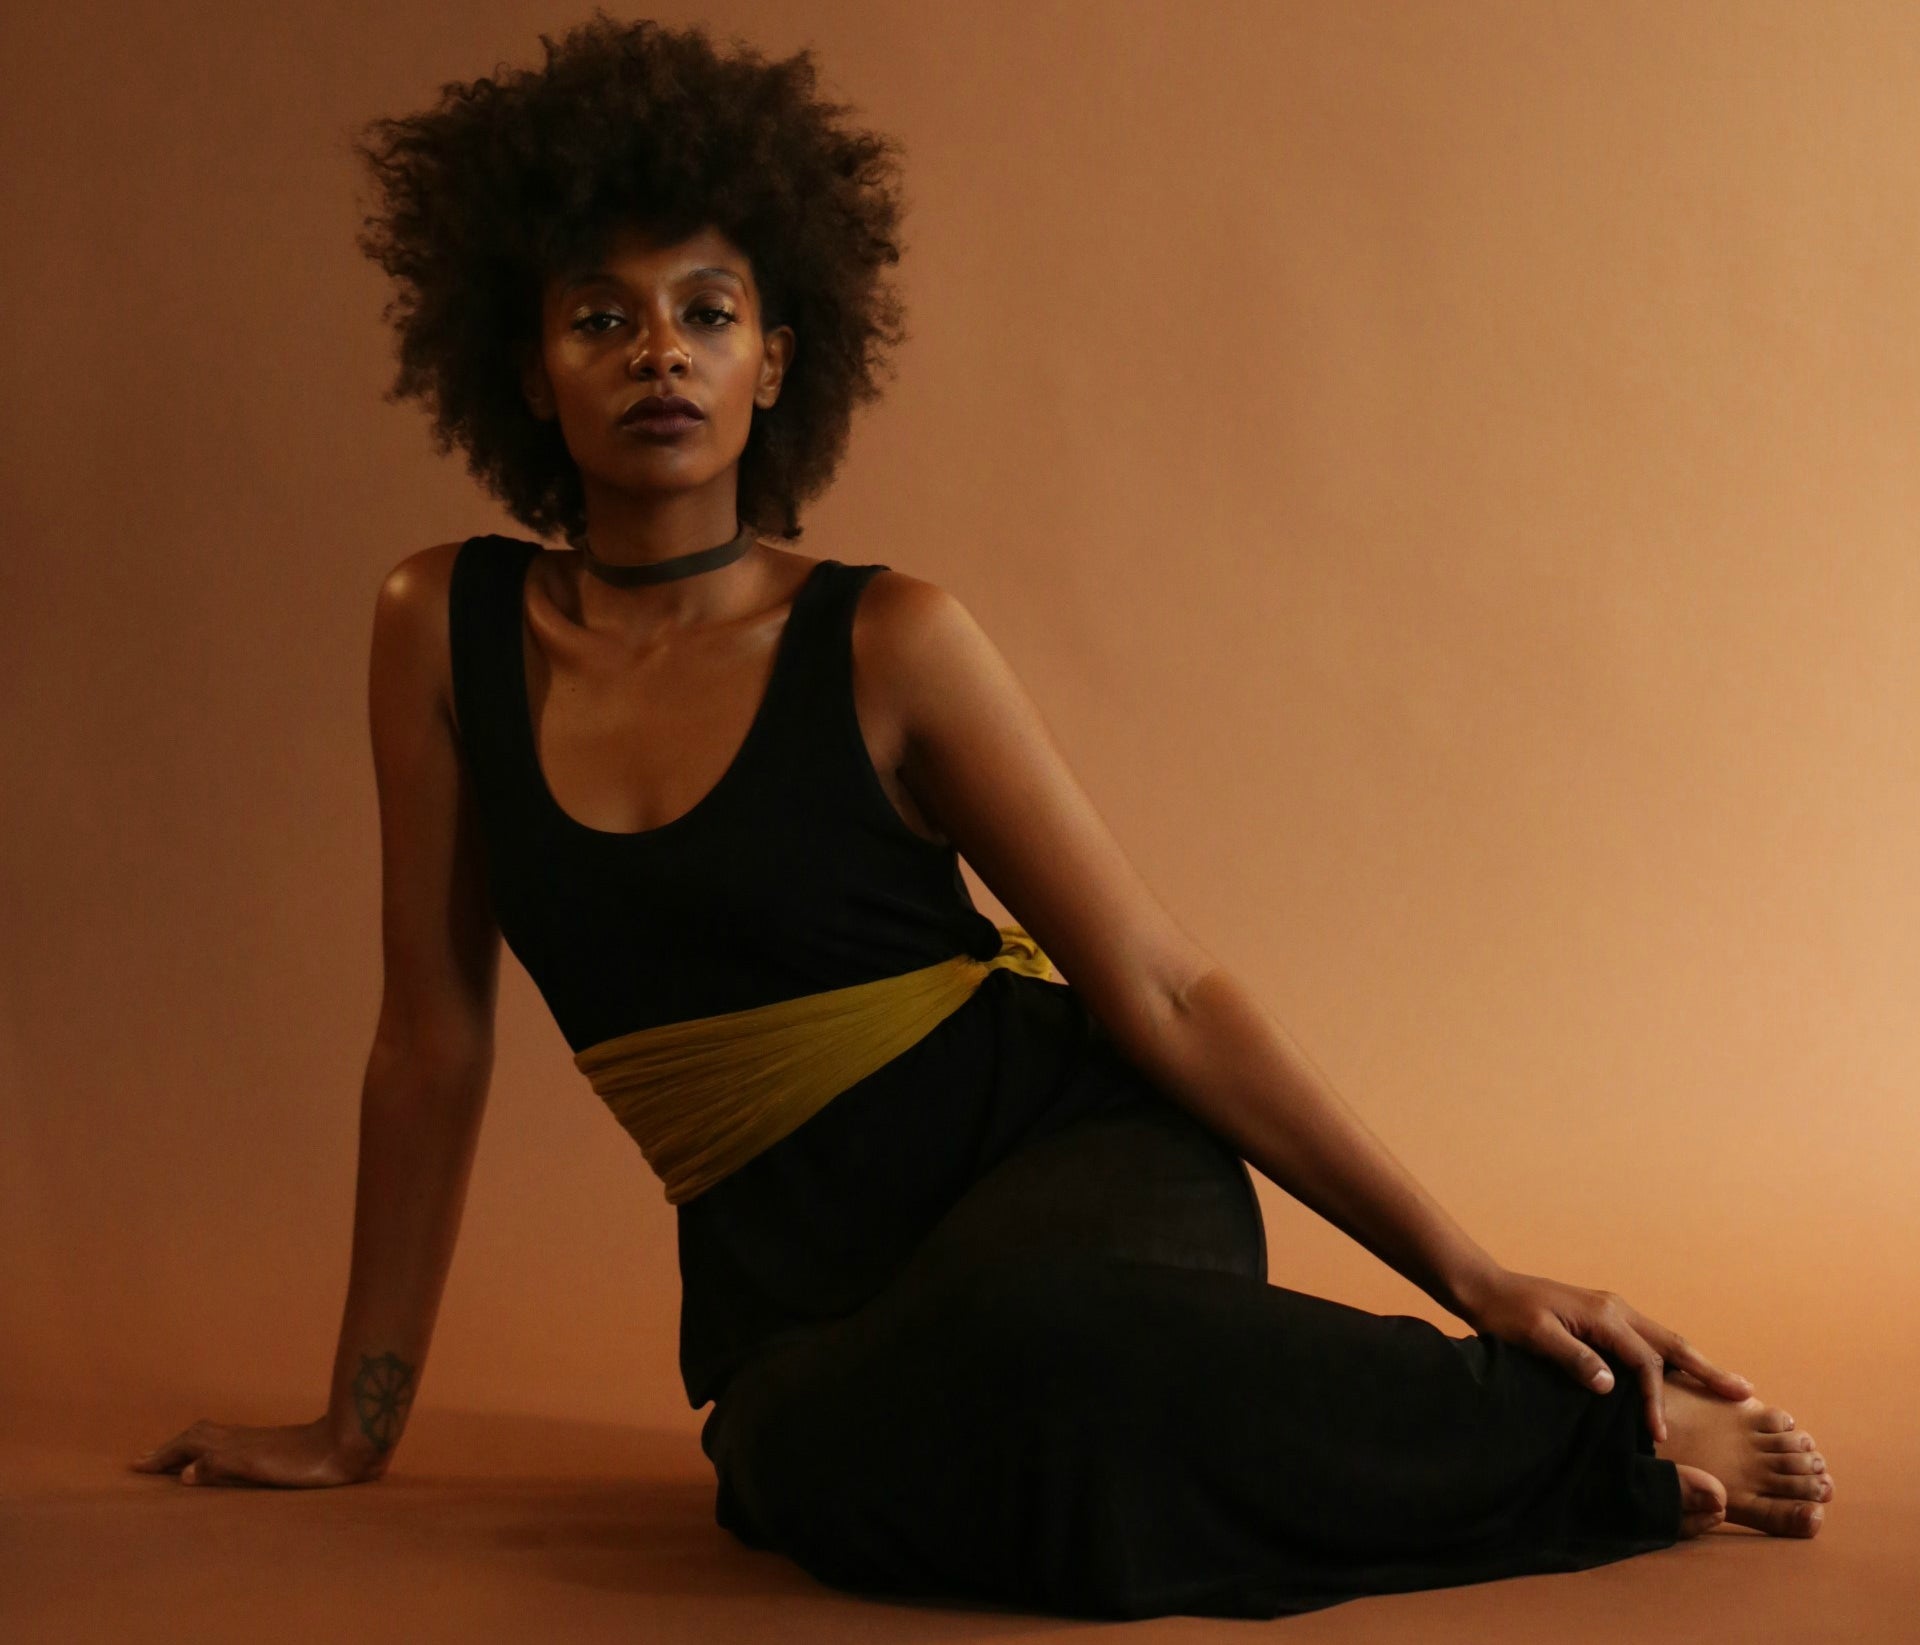 Mereba's New Single 'Planet U' Will Give You All The Feels